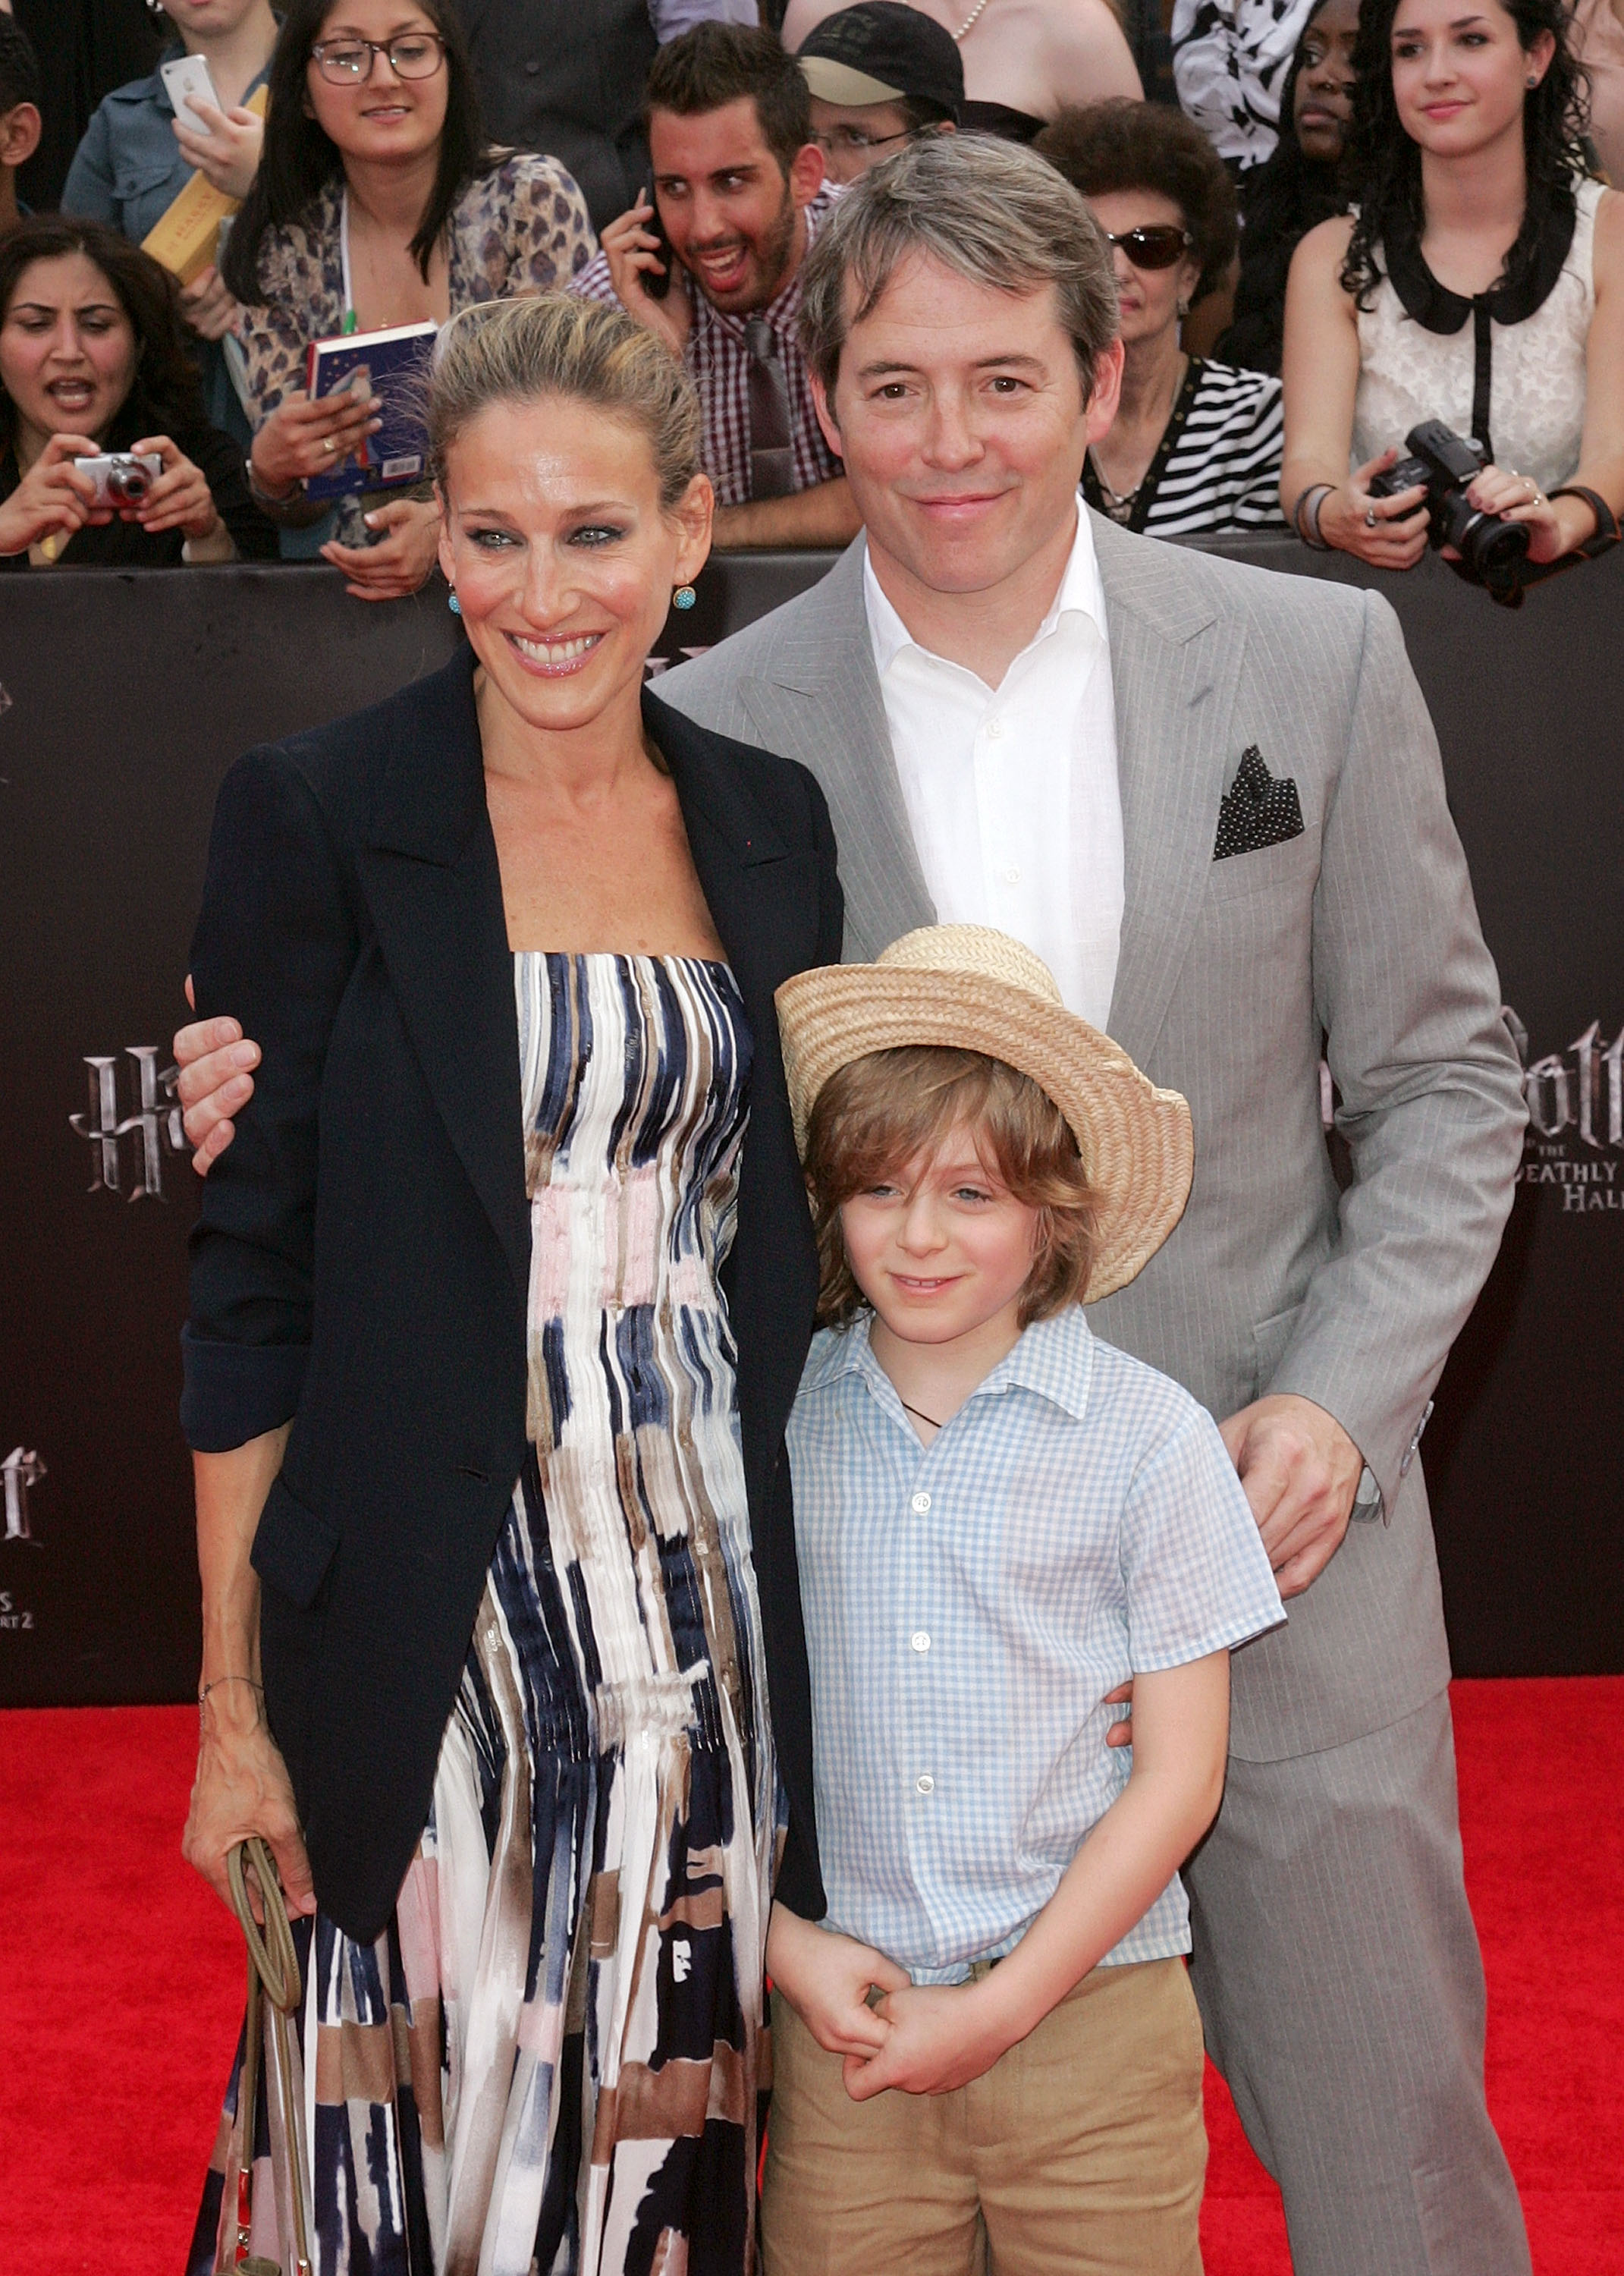 Sarah Jessica Parker, James Broderick, and Matthew Broderick at the premiere of "Harry Potter and the Deathly Hallows - Part 2," 2011 | Source: Getty Images